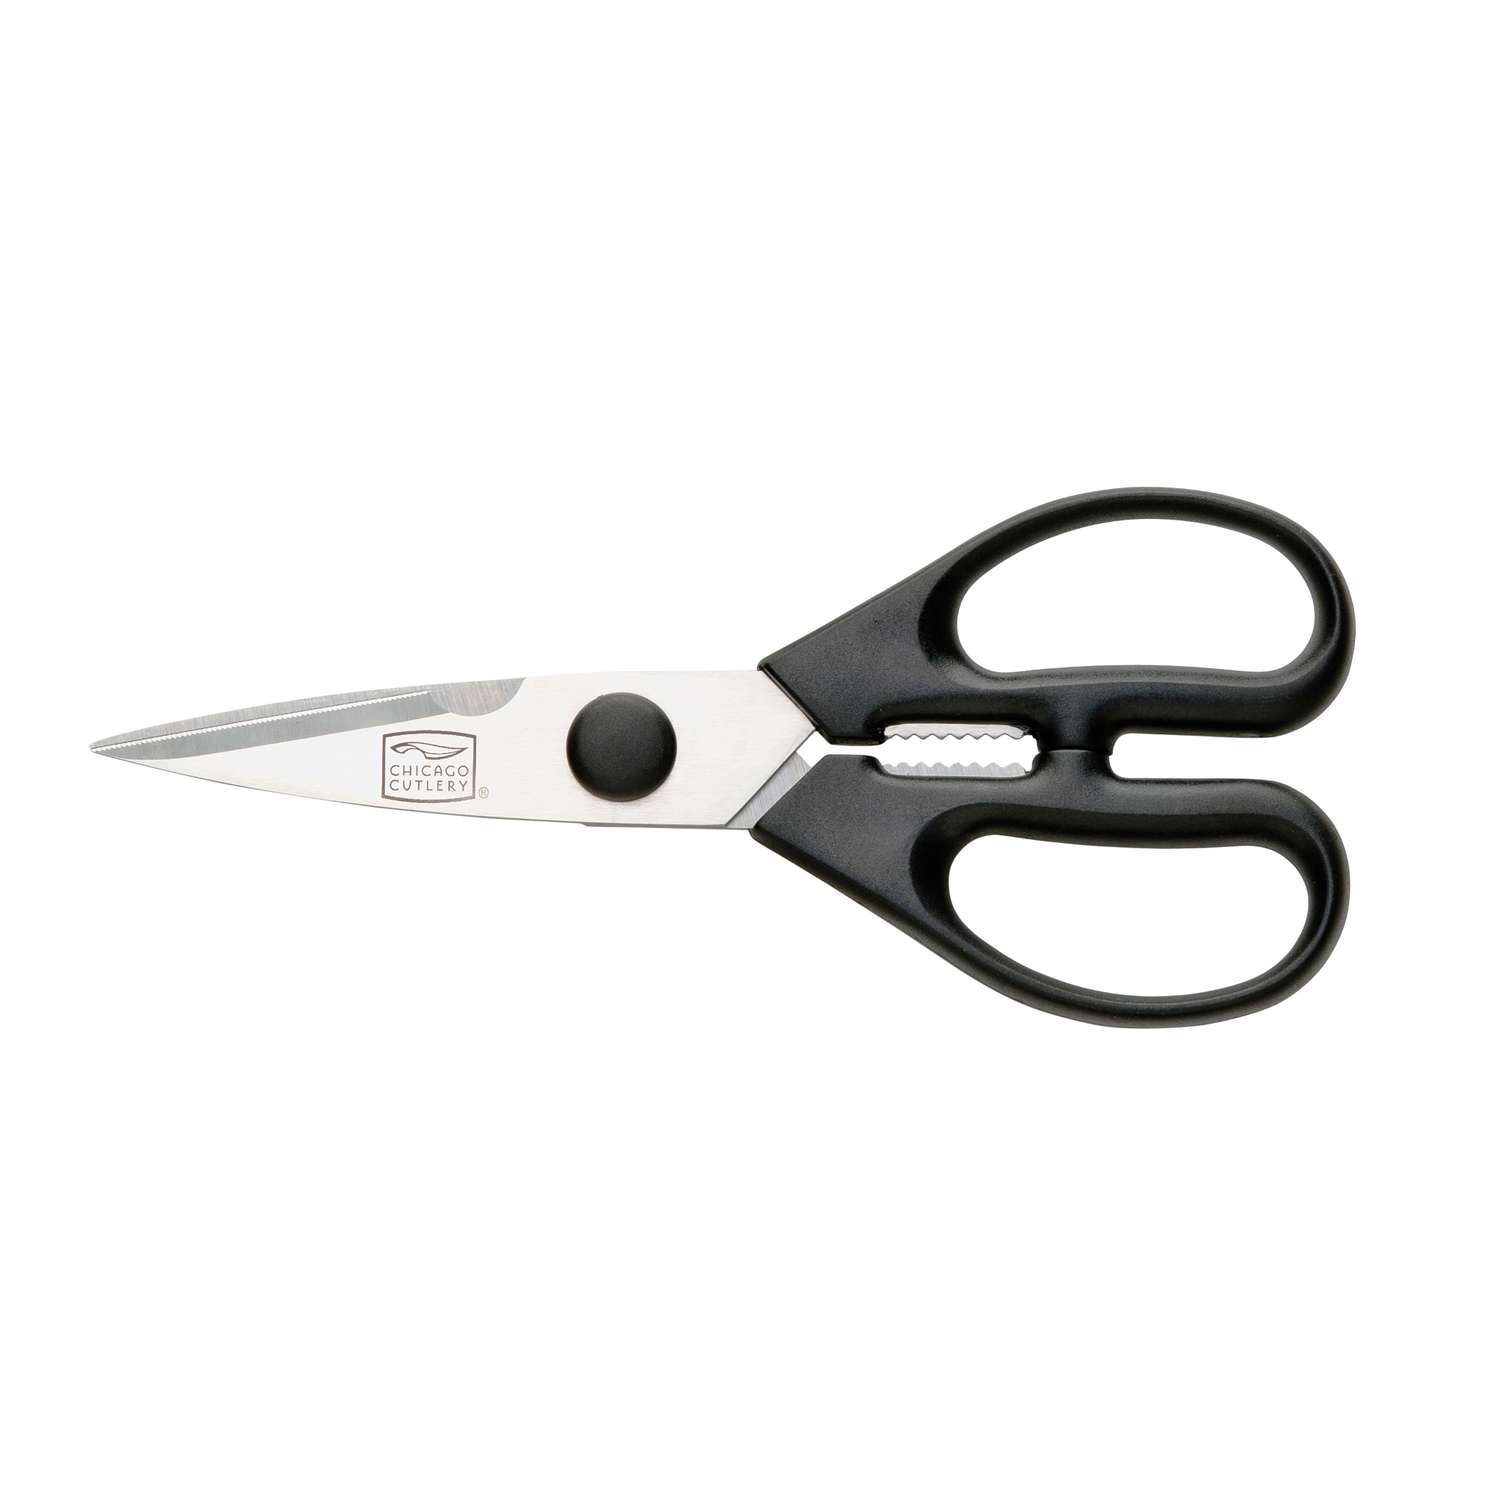 Chicago Cutlery 1095156 Kitchen Shears Stainless Steel, Black